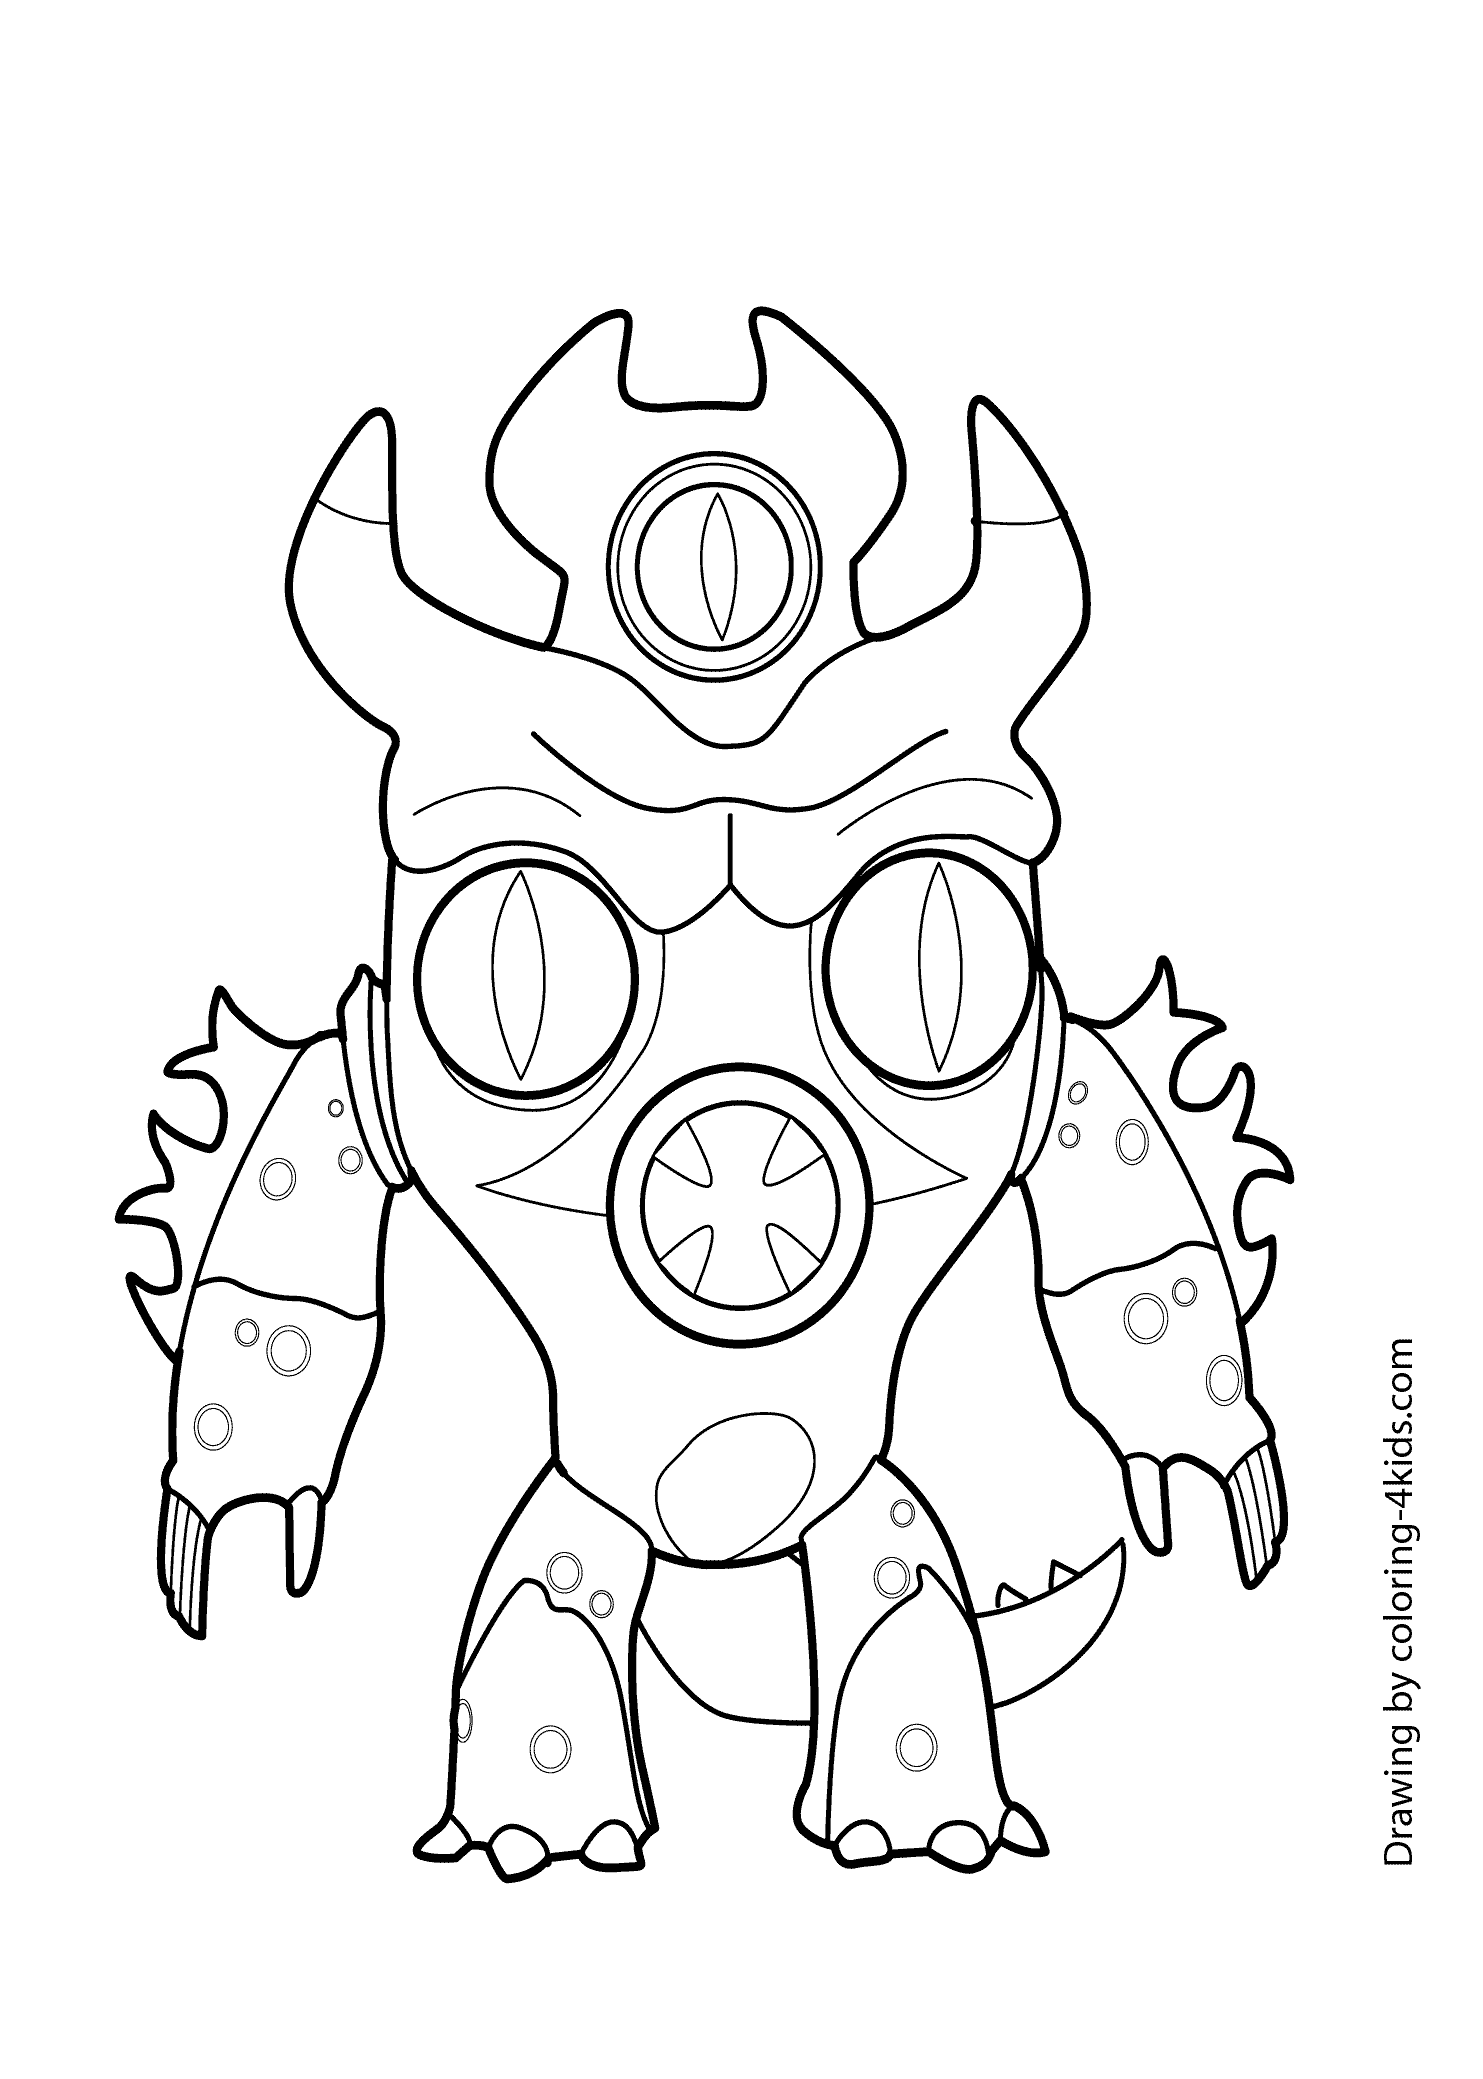 Big Hero 6 Coloring Pages - Coloring Home